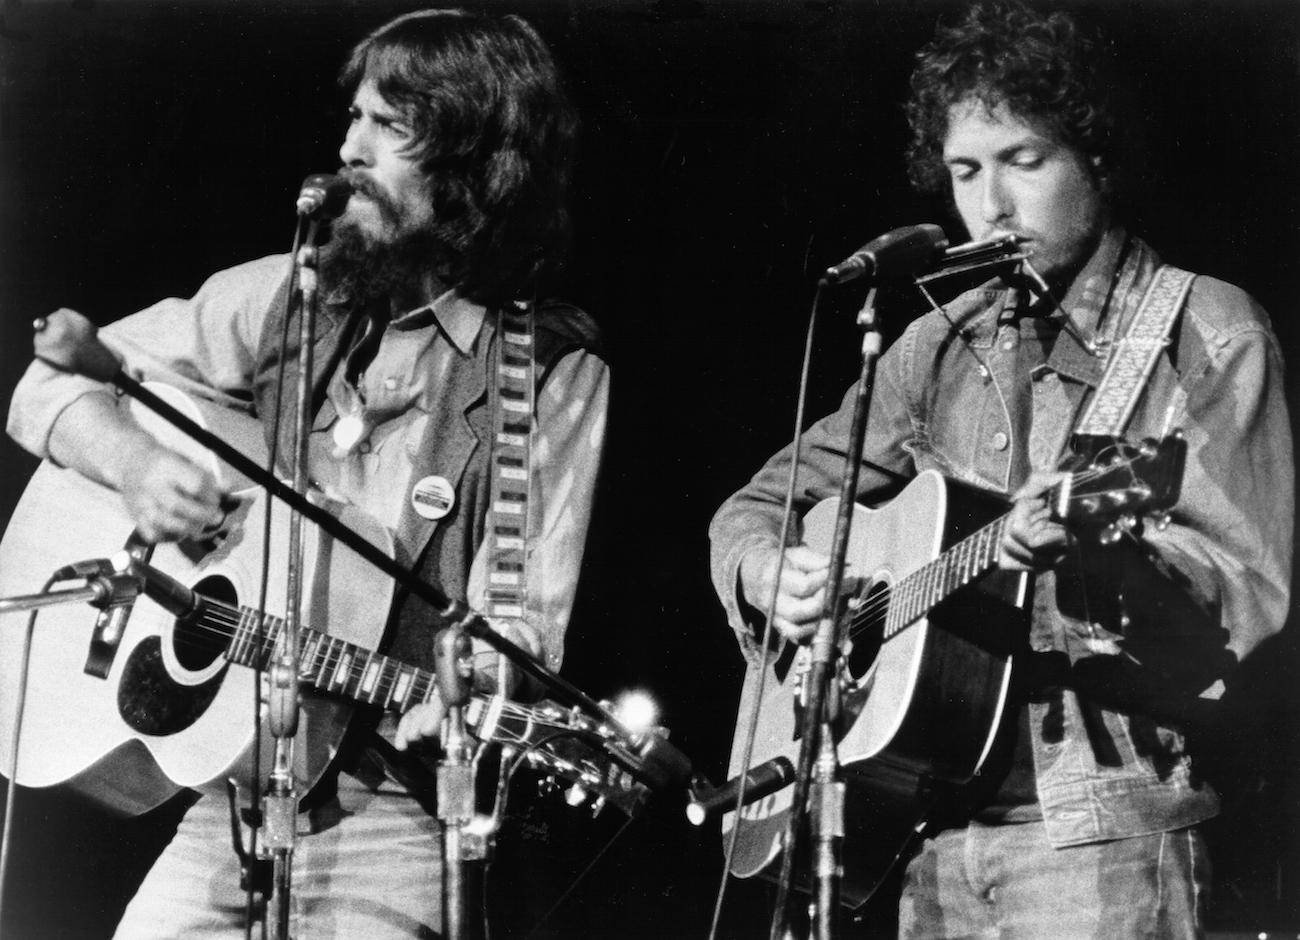 George Harrison and Bob Dylan performing during the Concert for Bangladesh, 1971.